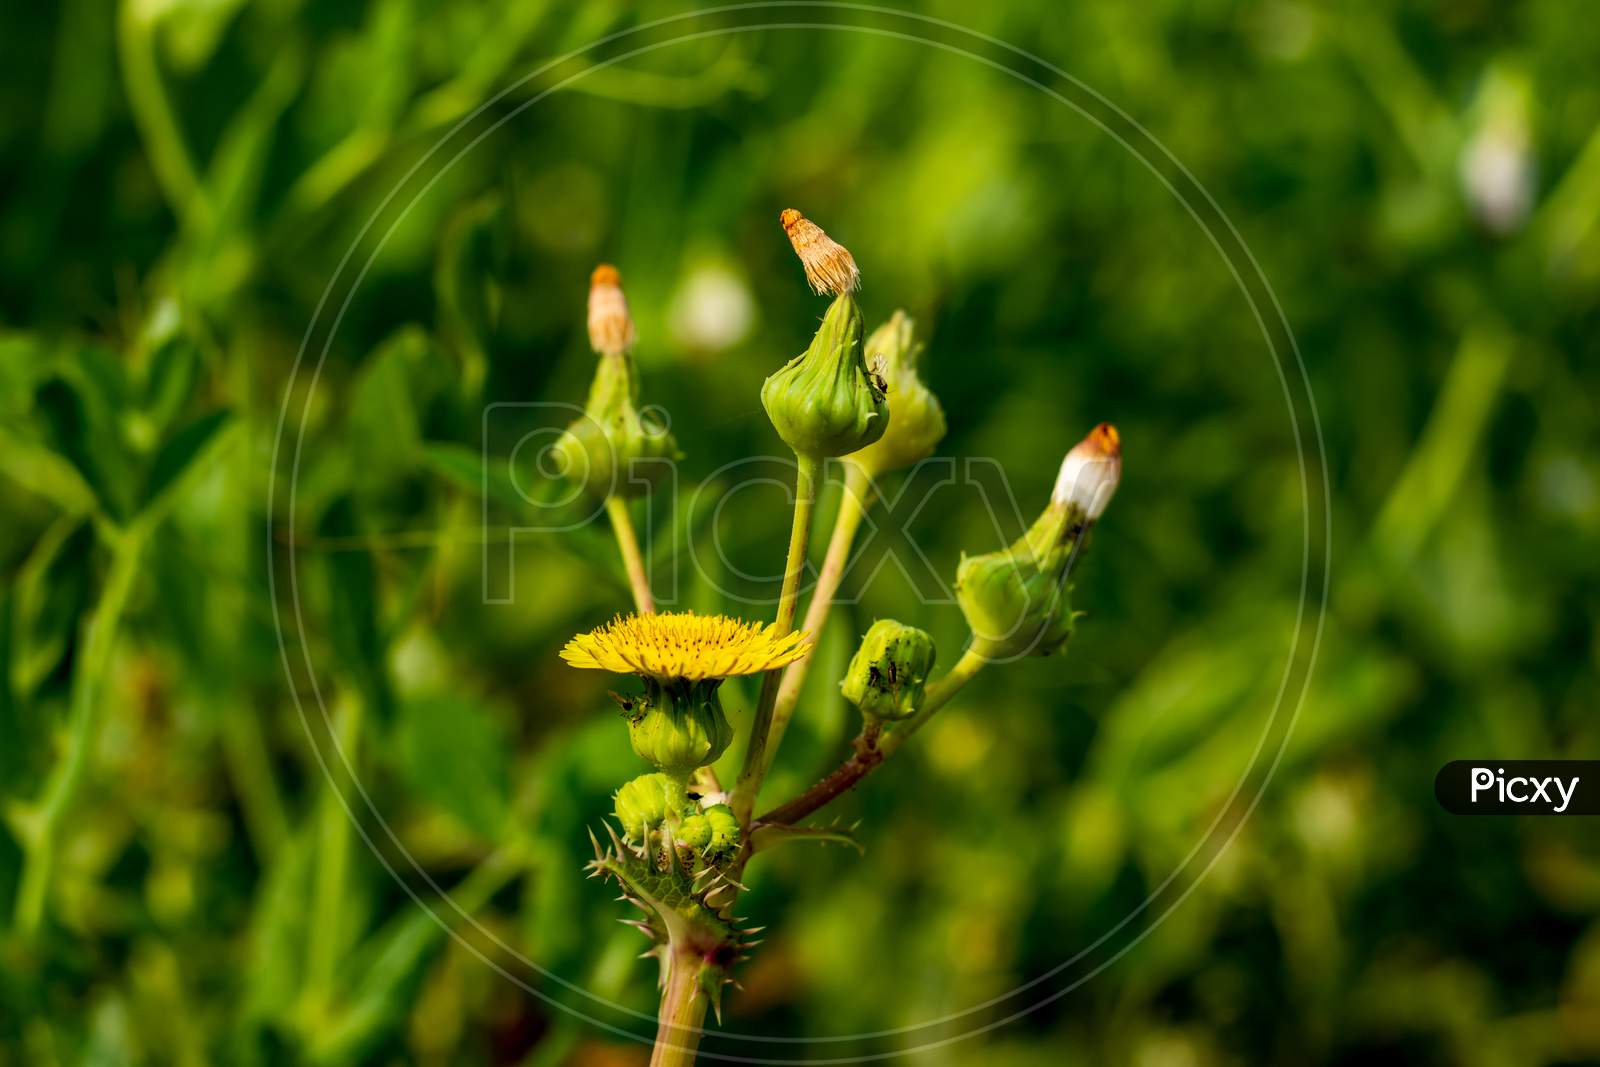 Sow Thistle Or Rough Milk Thistle Yellow Flowers, Flower Buds Growing